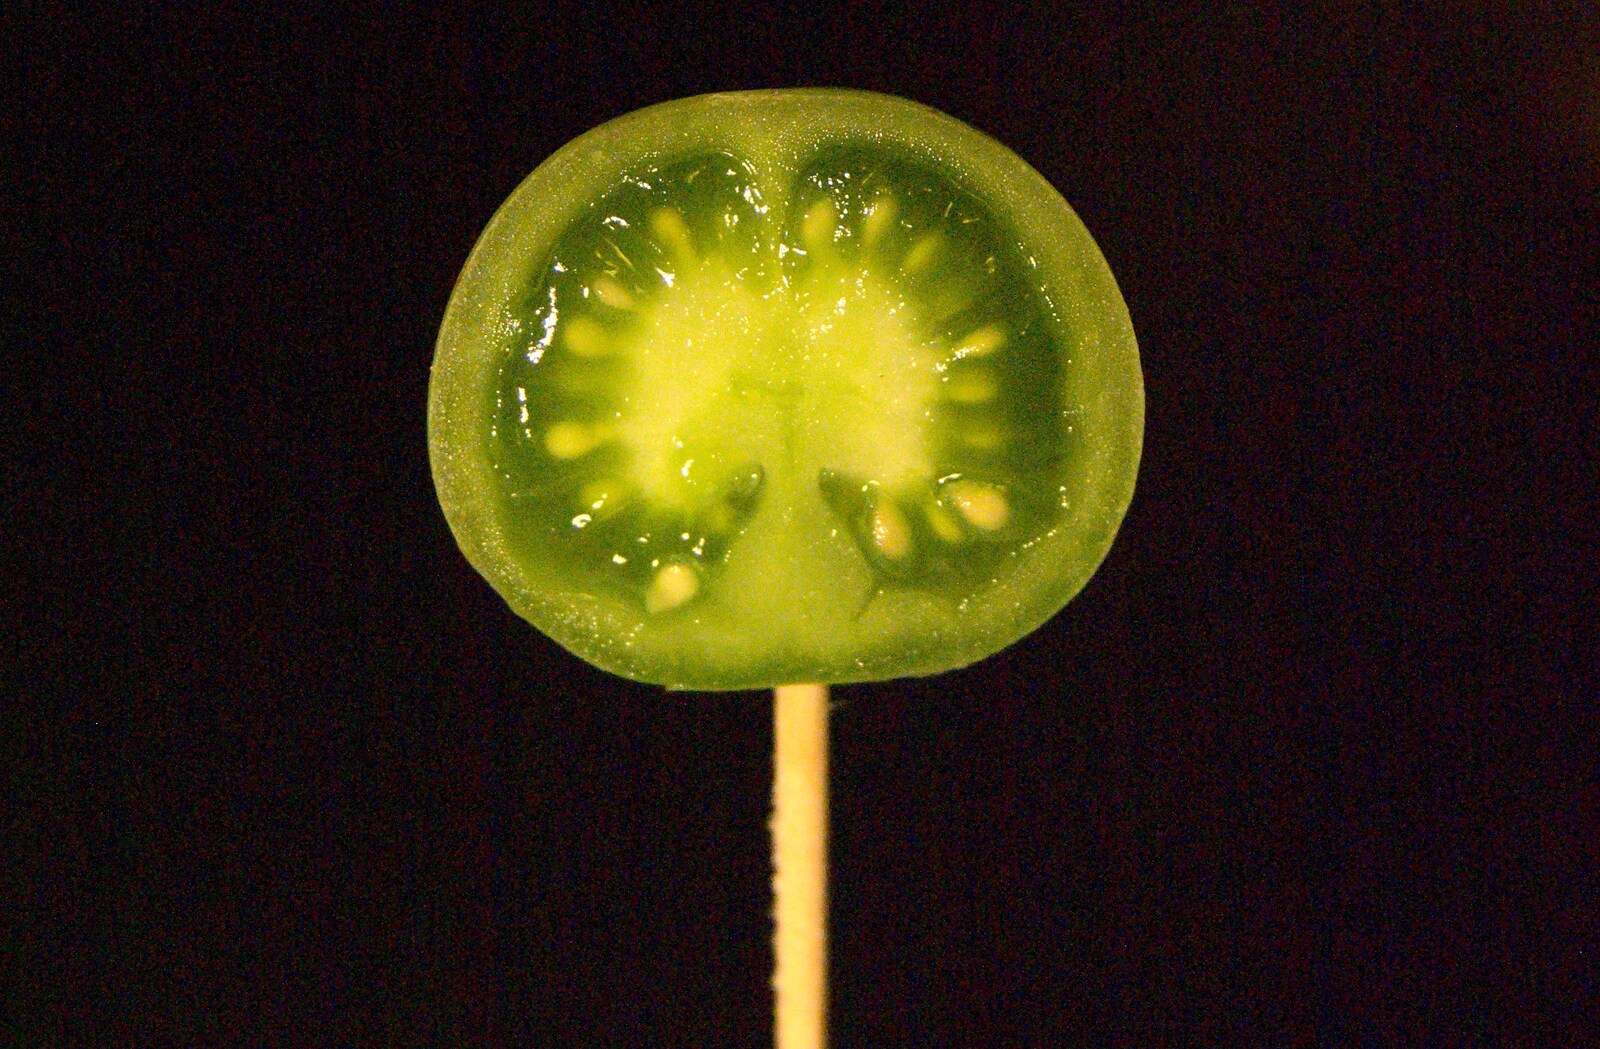 A small green tomato on a stick from London Demonstration and a November Miscellany, London and Brome, Suffolk - 12th November 2011